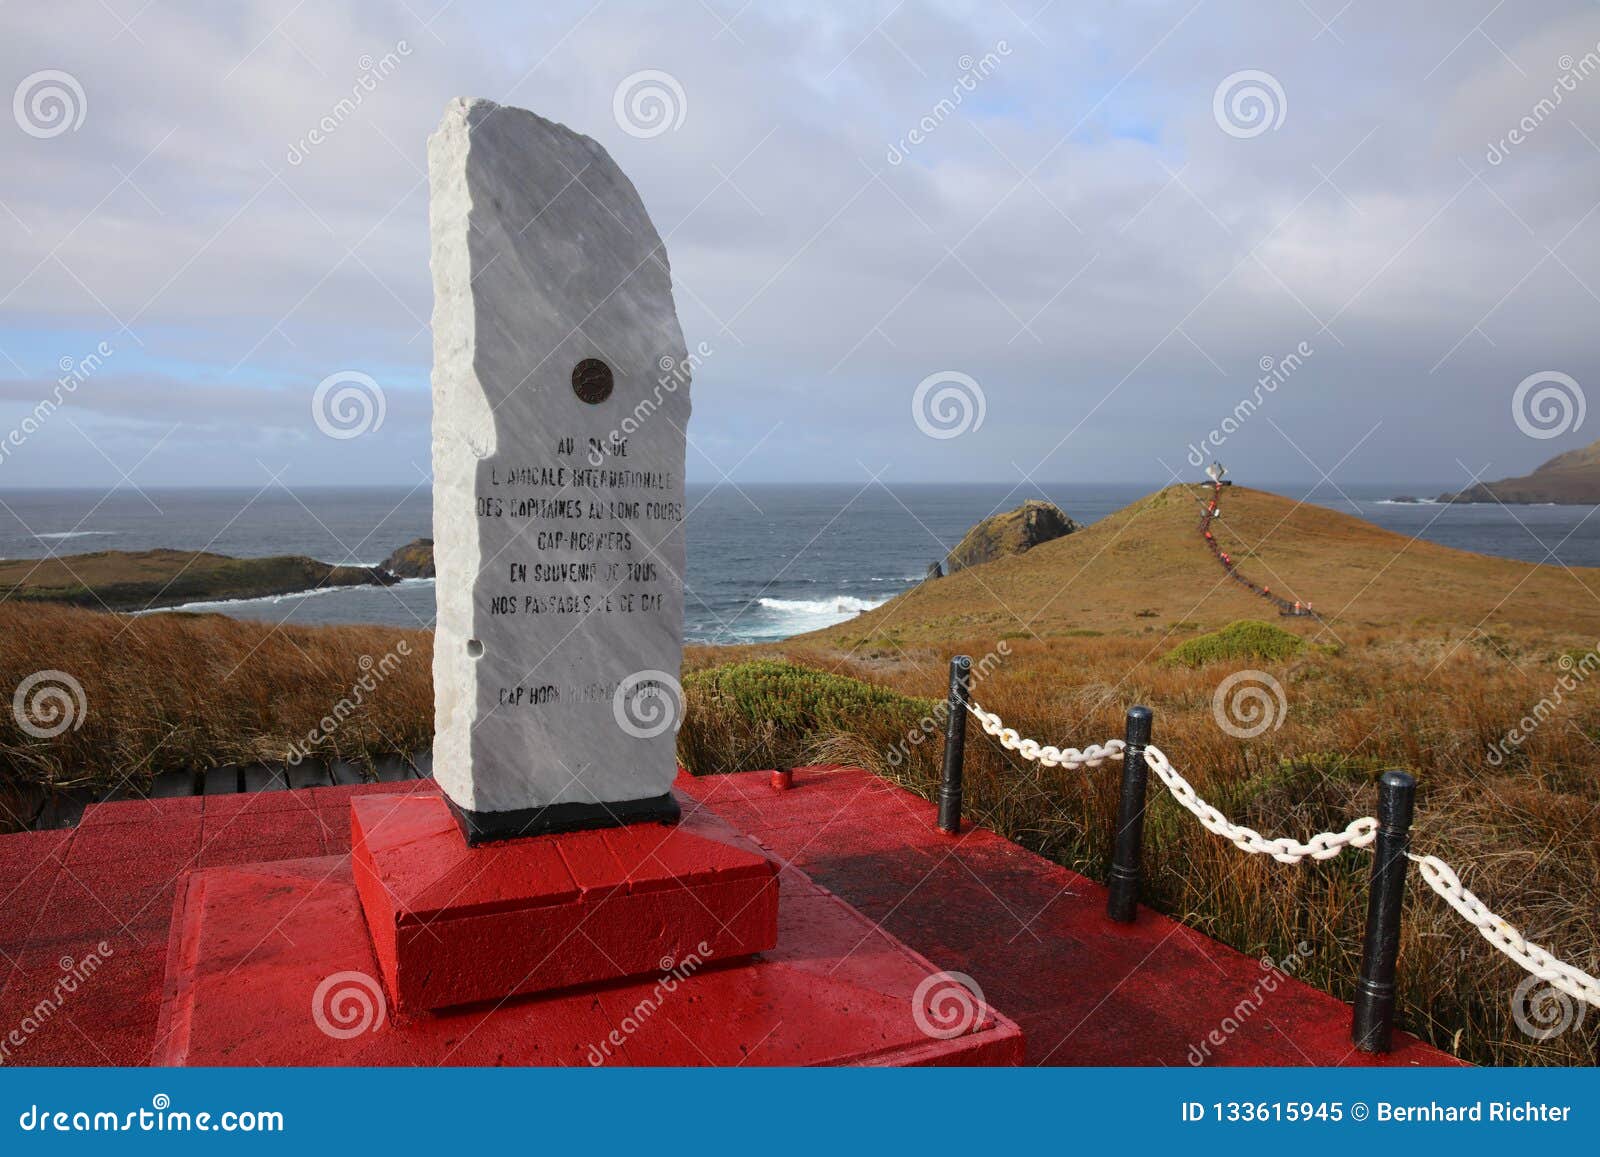 Monument on Island. in the Background Tourists at the Albatross. Cape Horn Editorial Image - Image of landmark, famous: 133615945